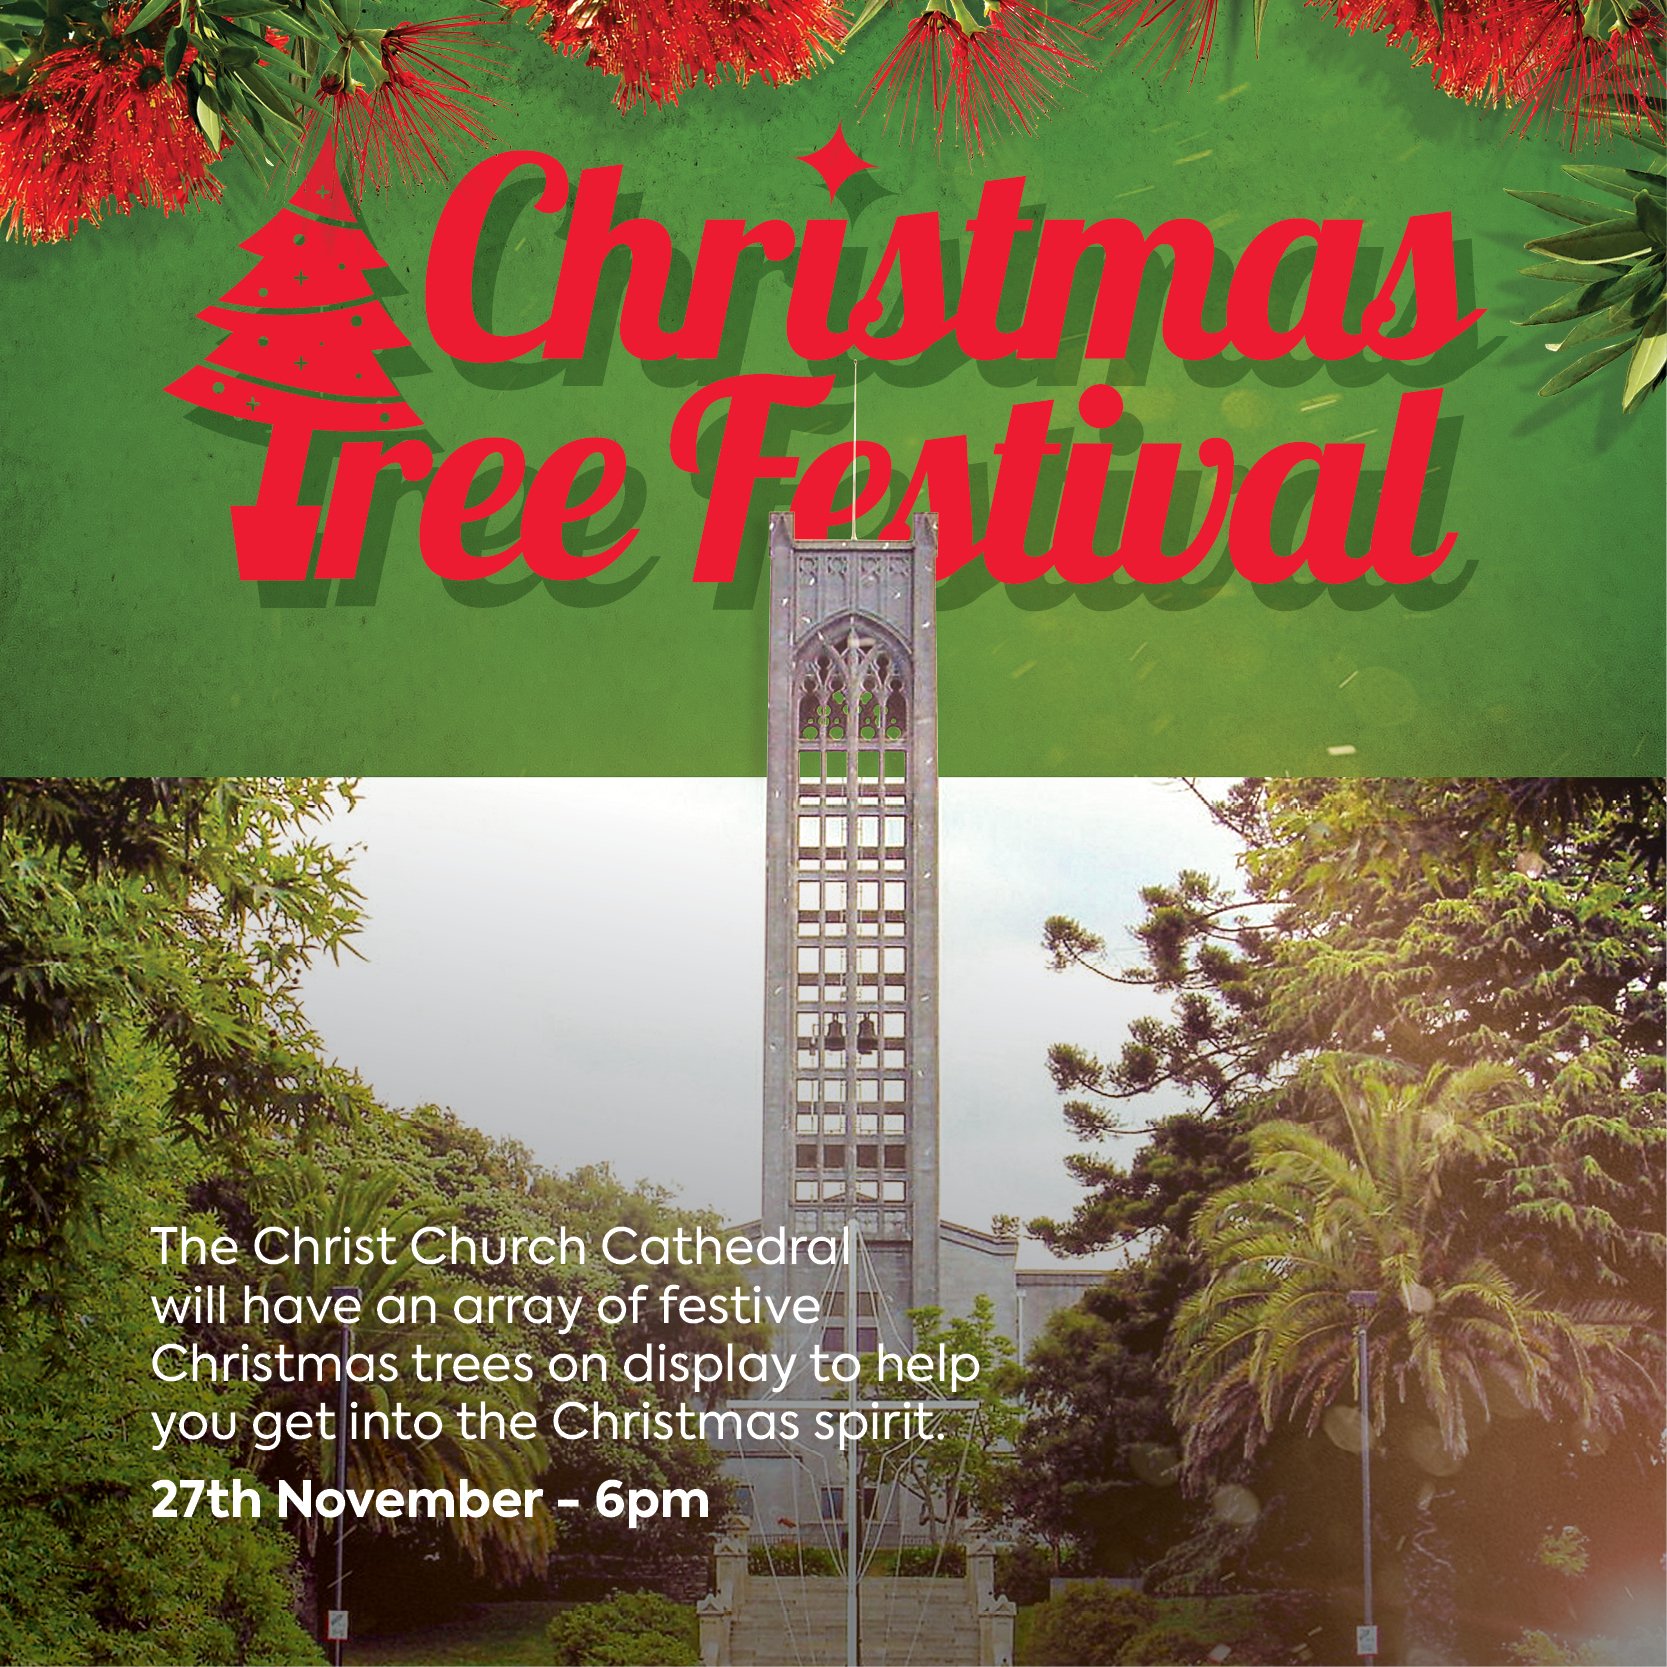 Christmas City Festival | Christmas Tree Festival at Nelson Cathedral | The Christ Church Cathedral | Nelson City Christmas in the City